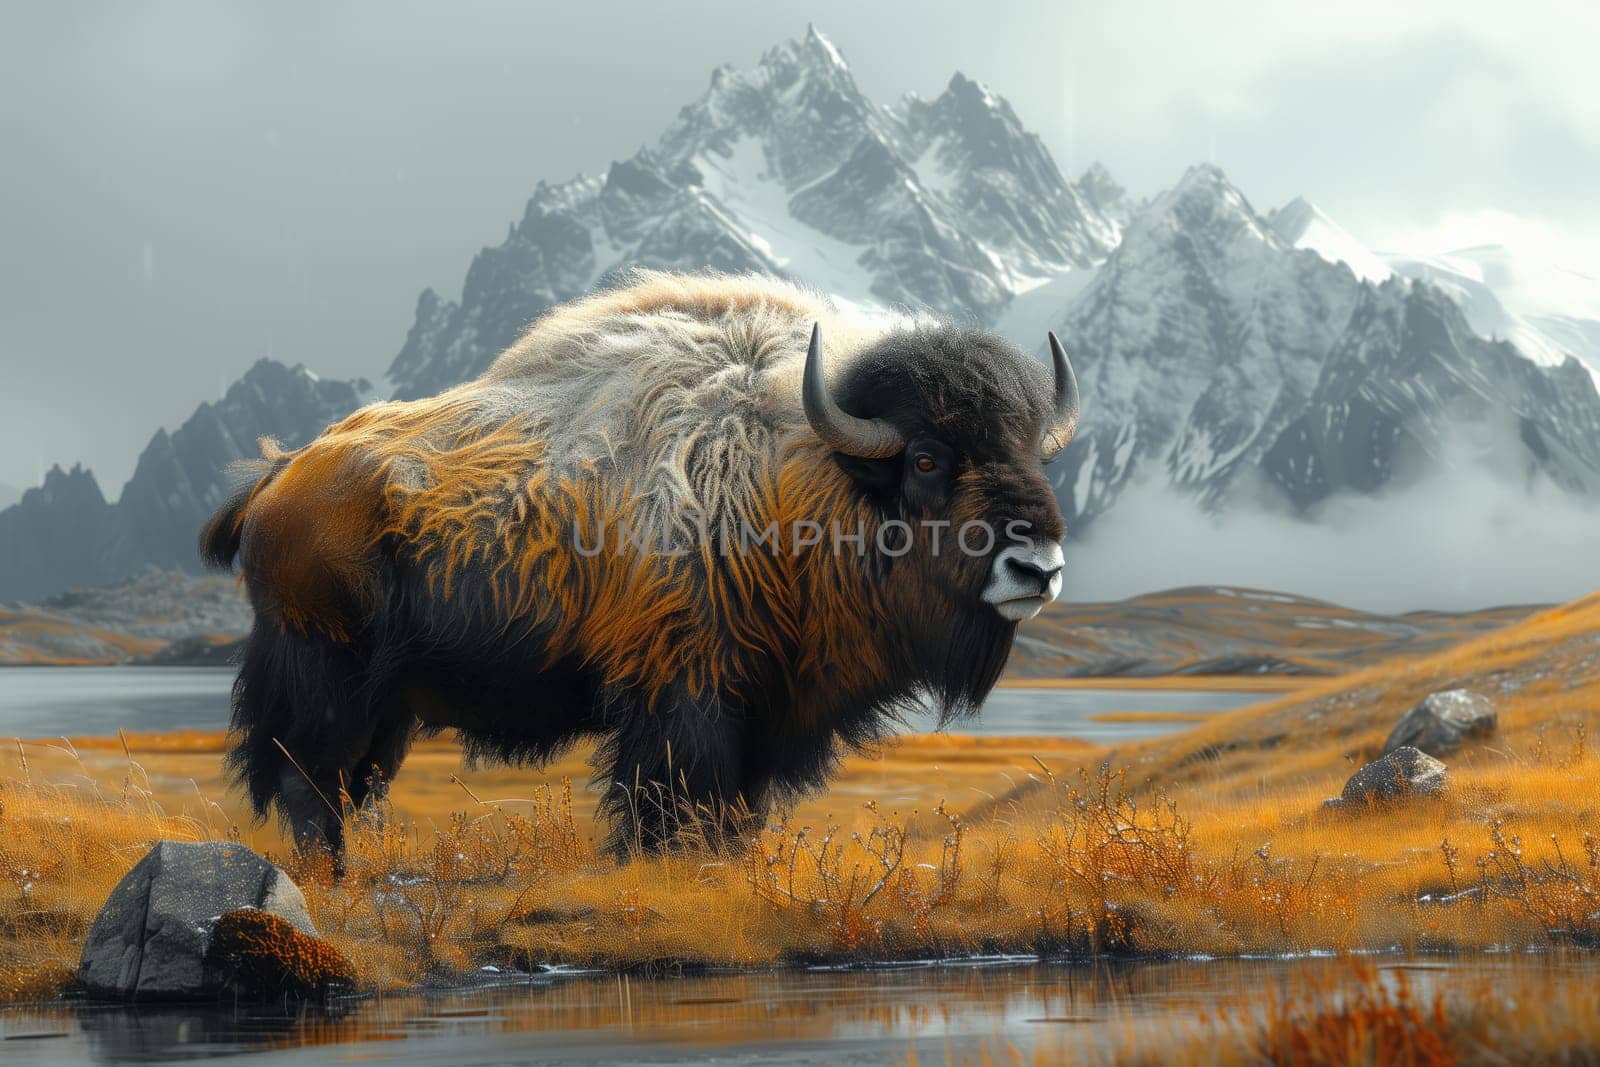 Bison in field next to lake with mountain backdrop in natural landscape by richwolf